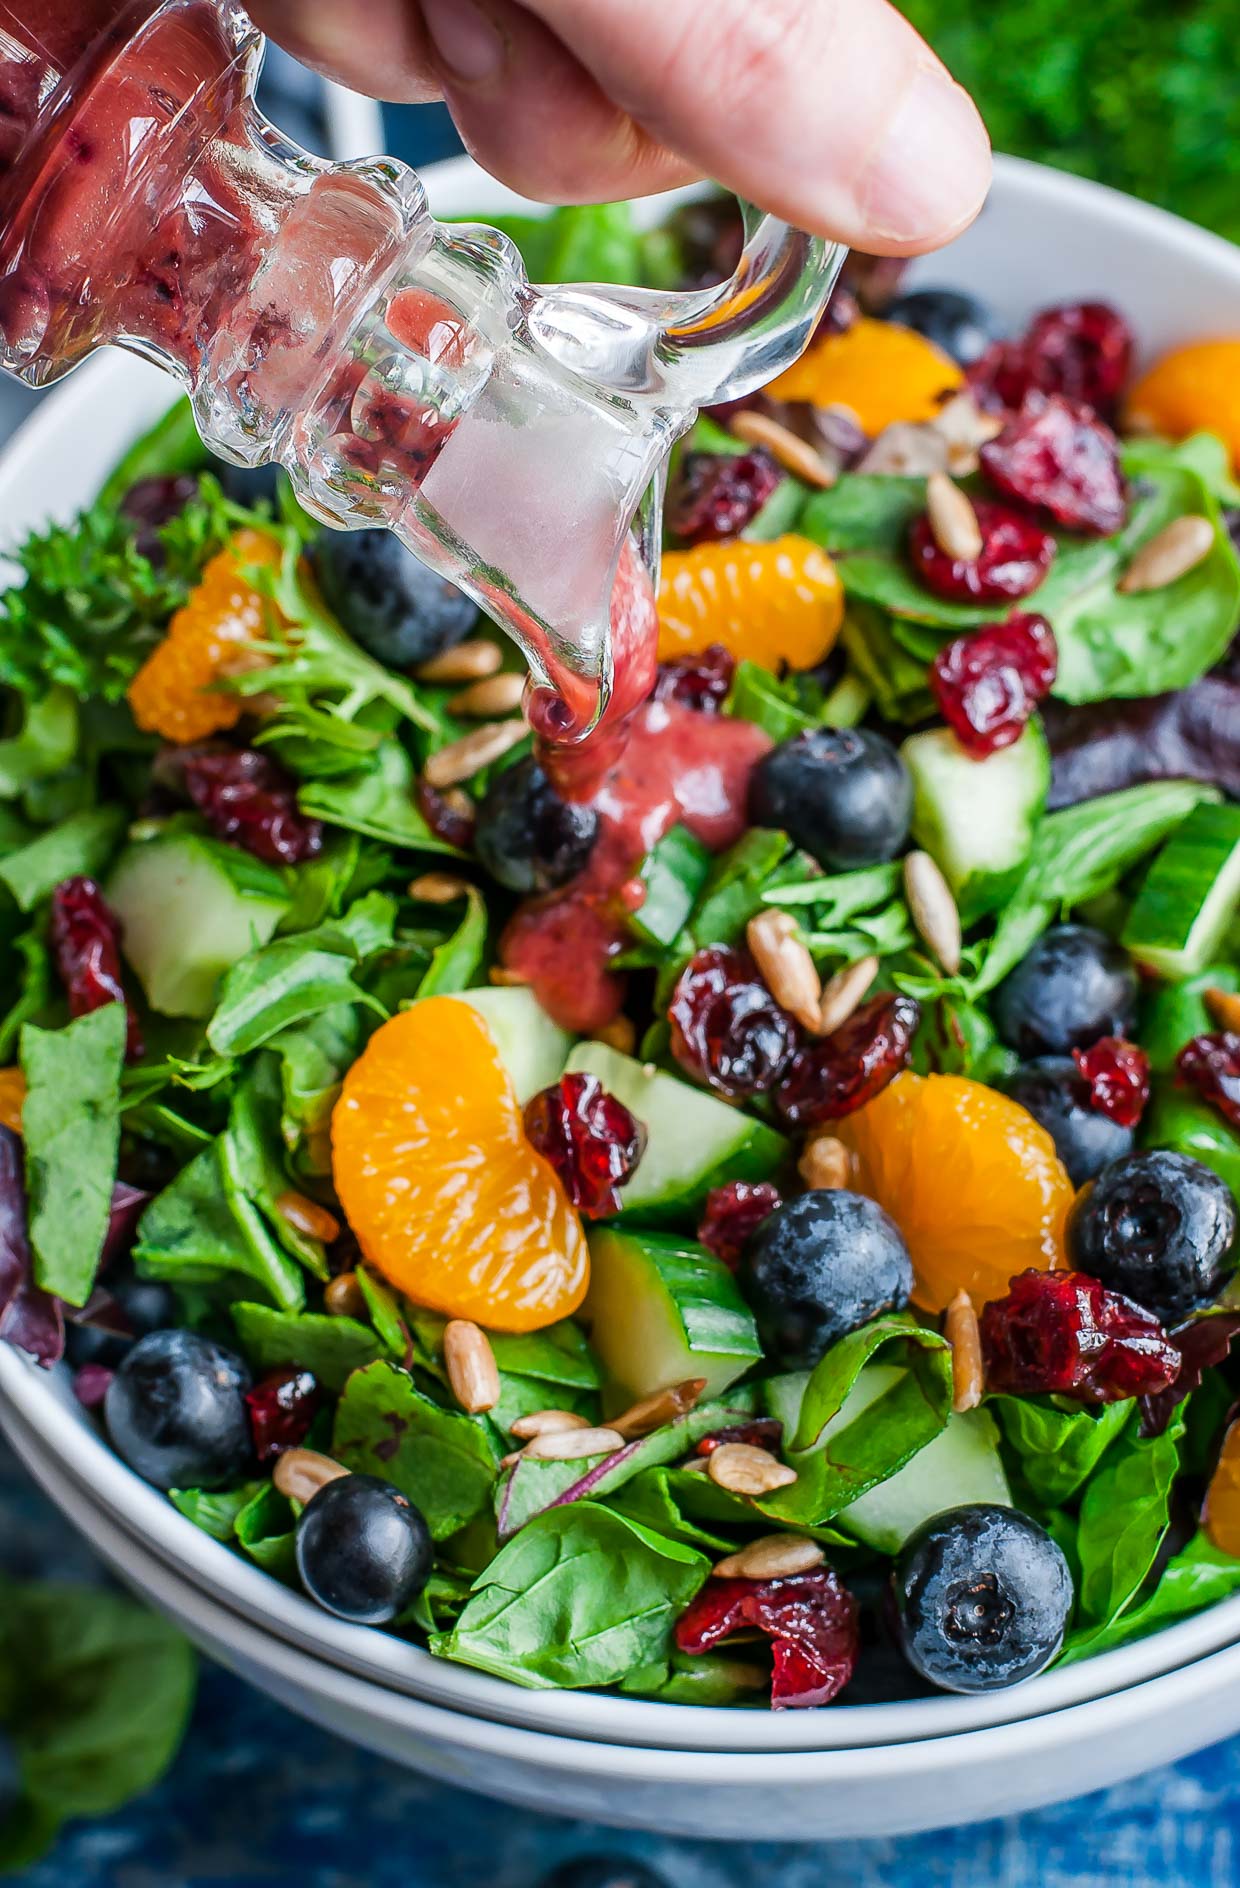 Pouring Balsamic Blueberry Salad Dressing on Salad